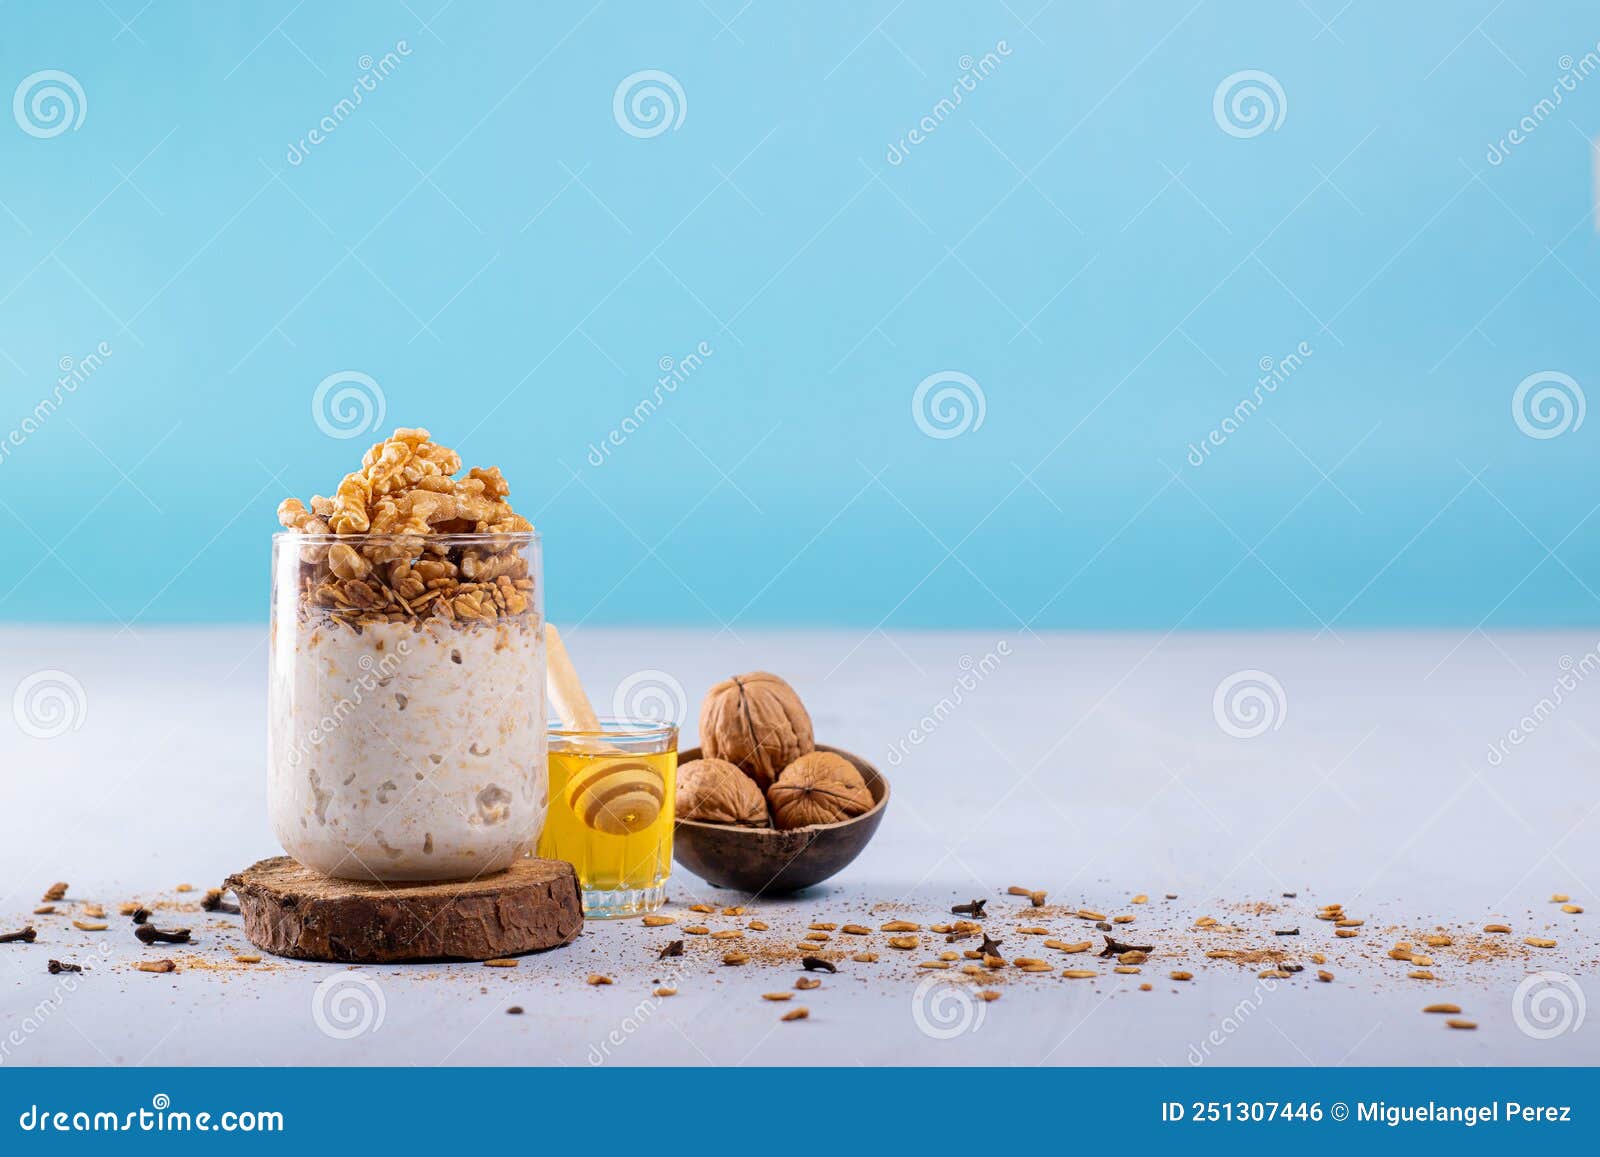 overnight oats with walnuts, accompanied with honey and whole walnuts